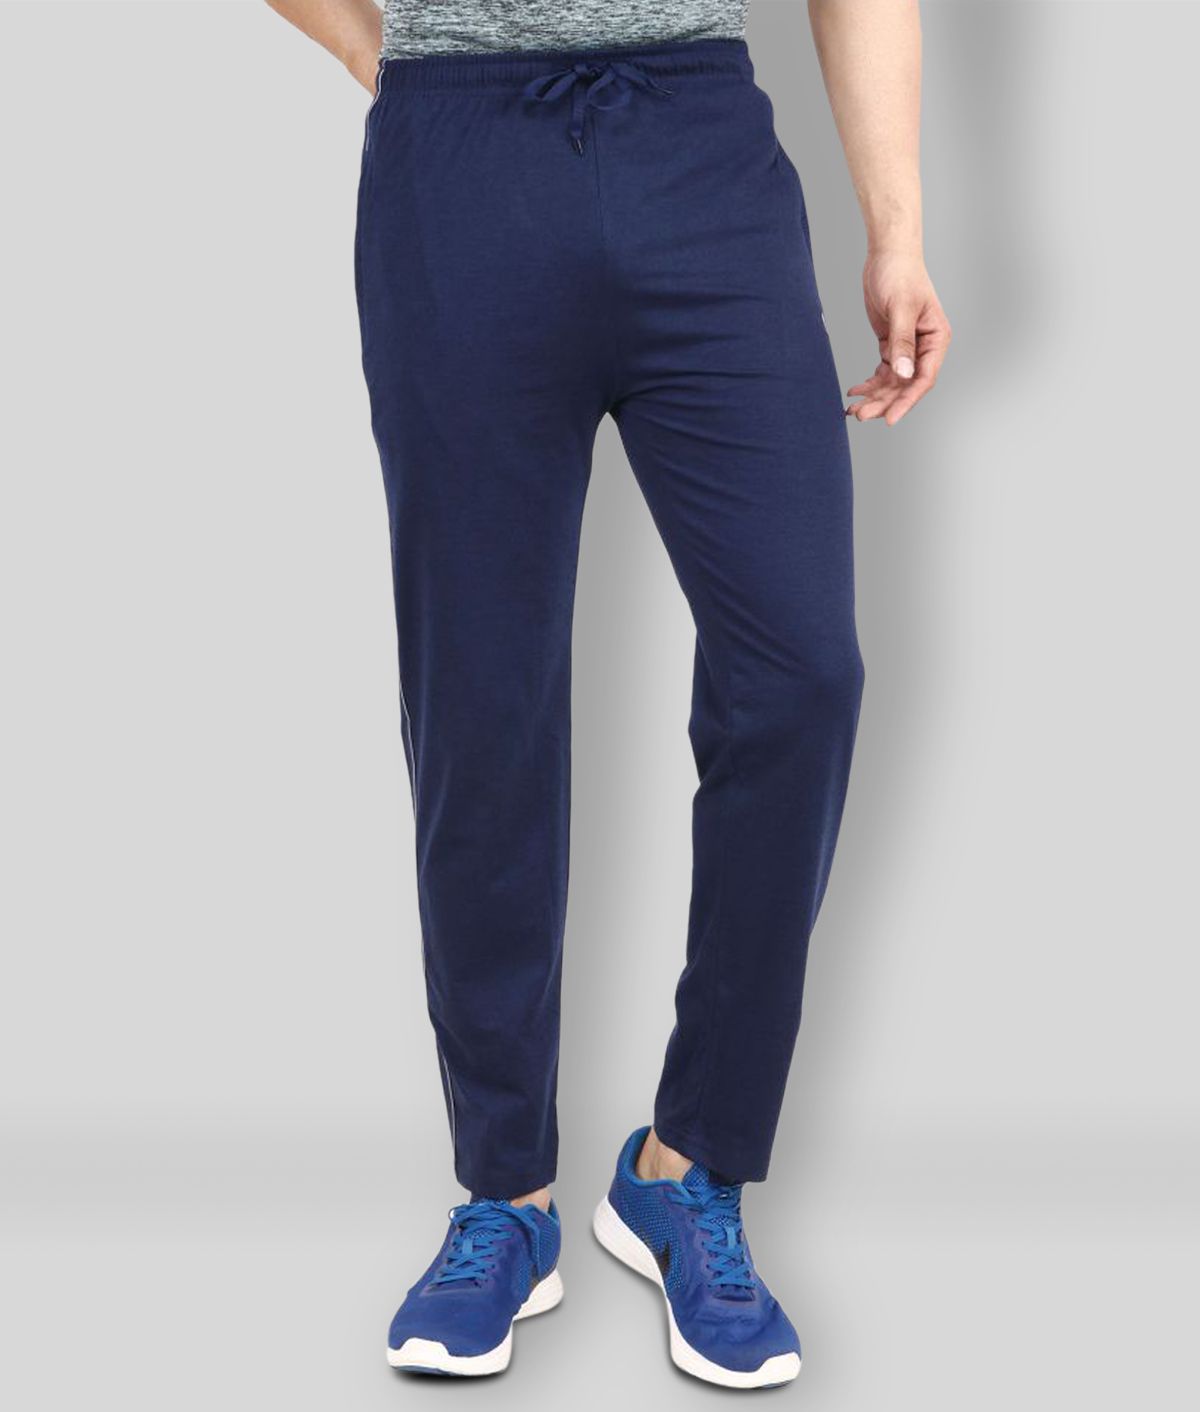 NEUVIN - Navy Cotton Men's Trackpants ( Pack of 1 )